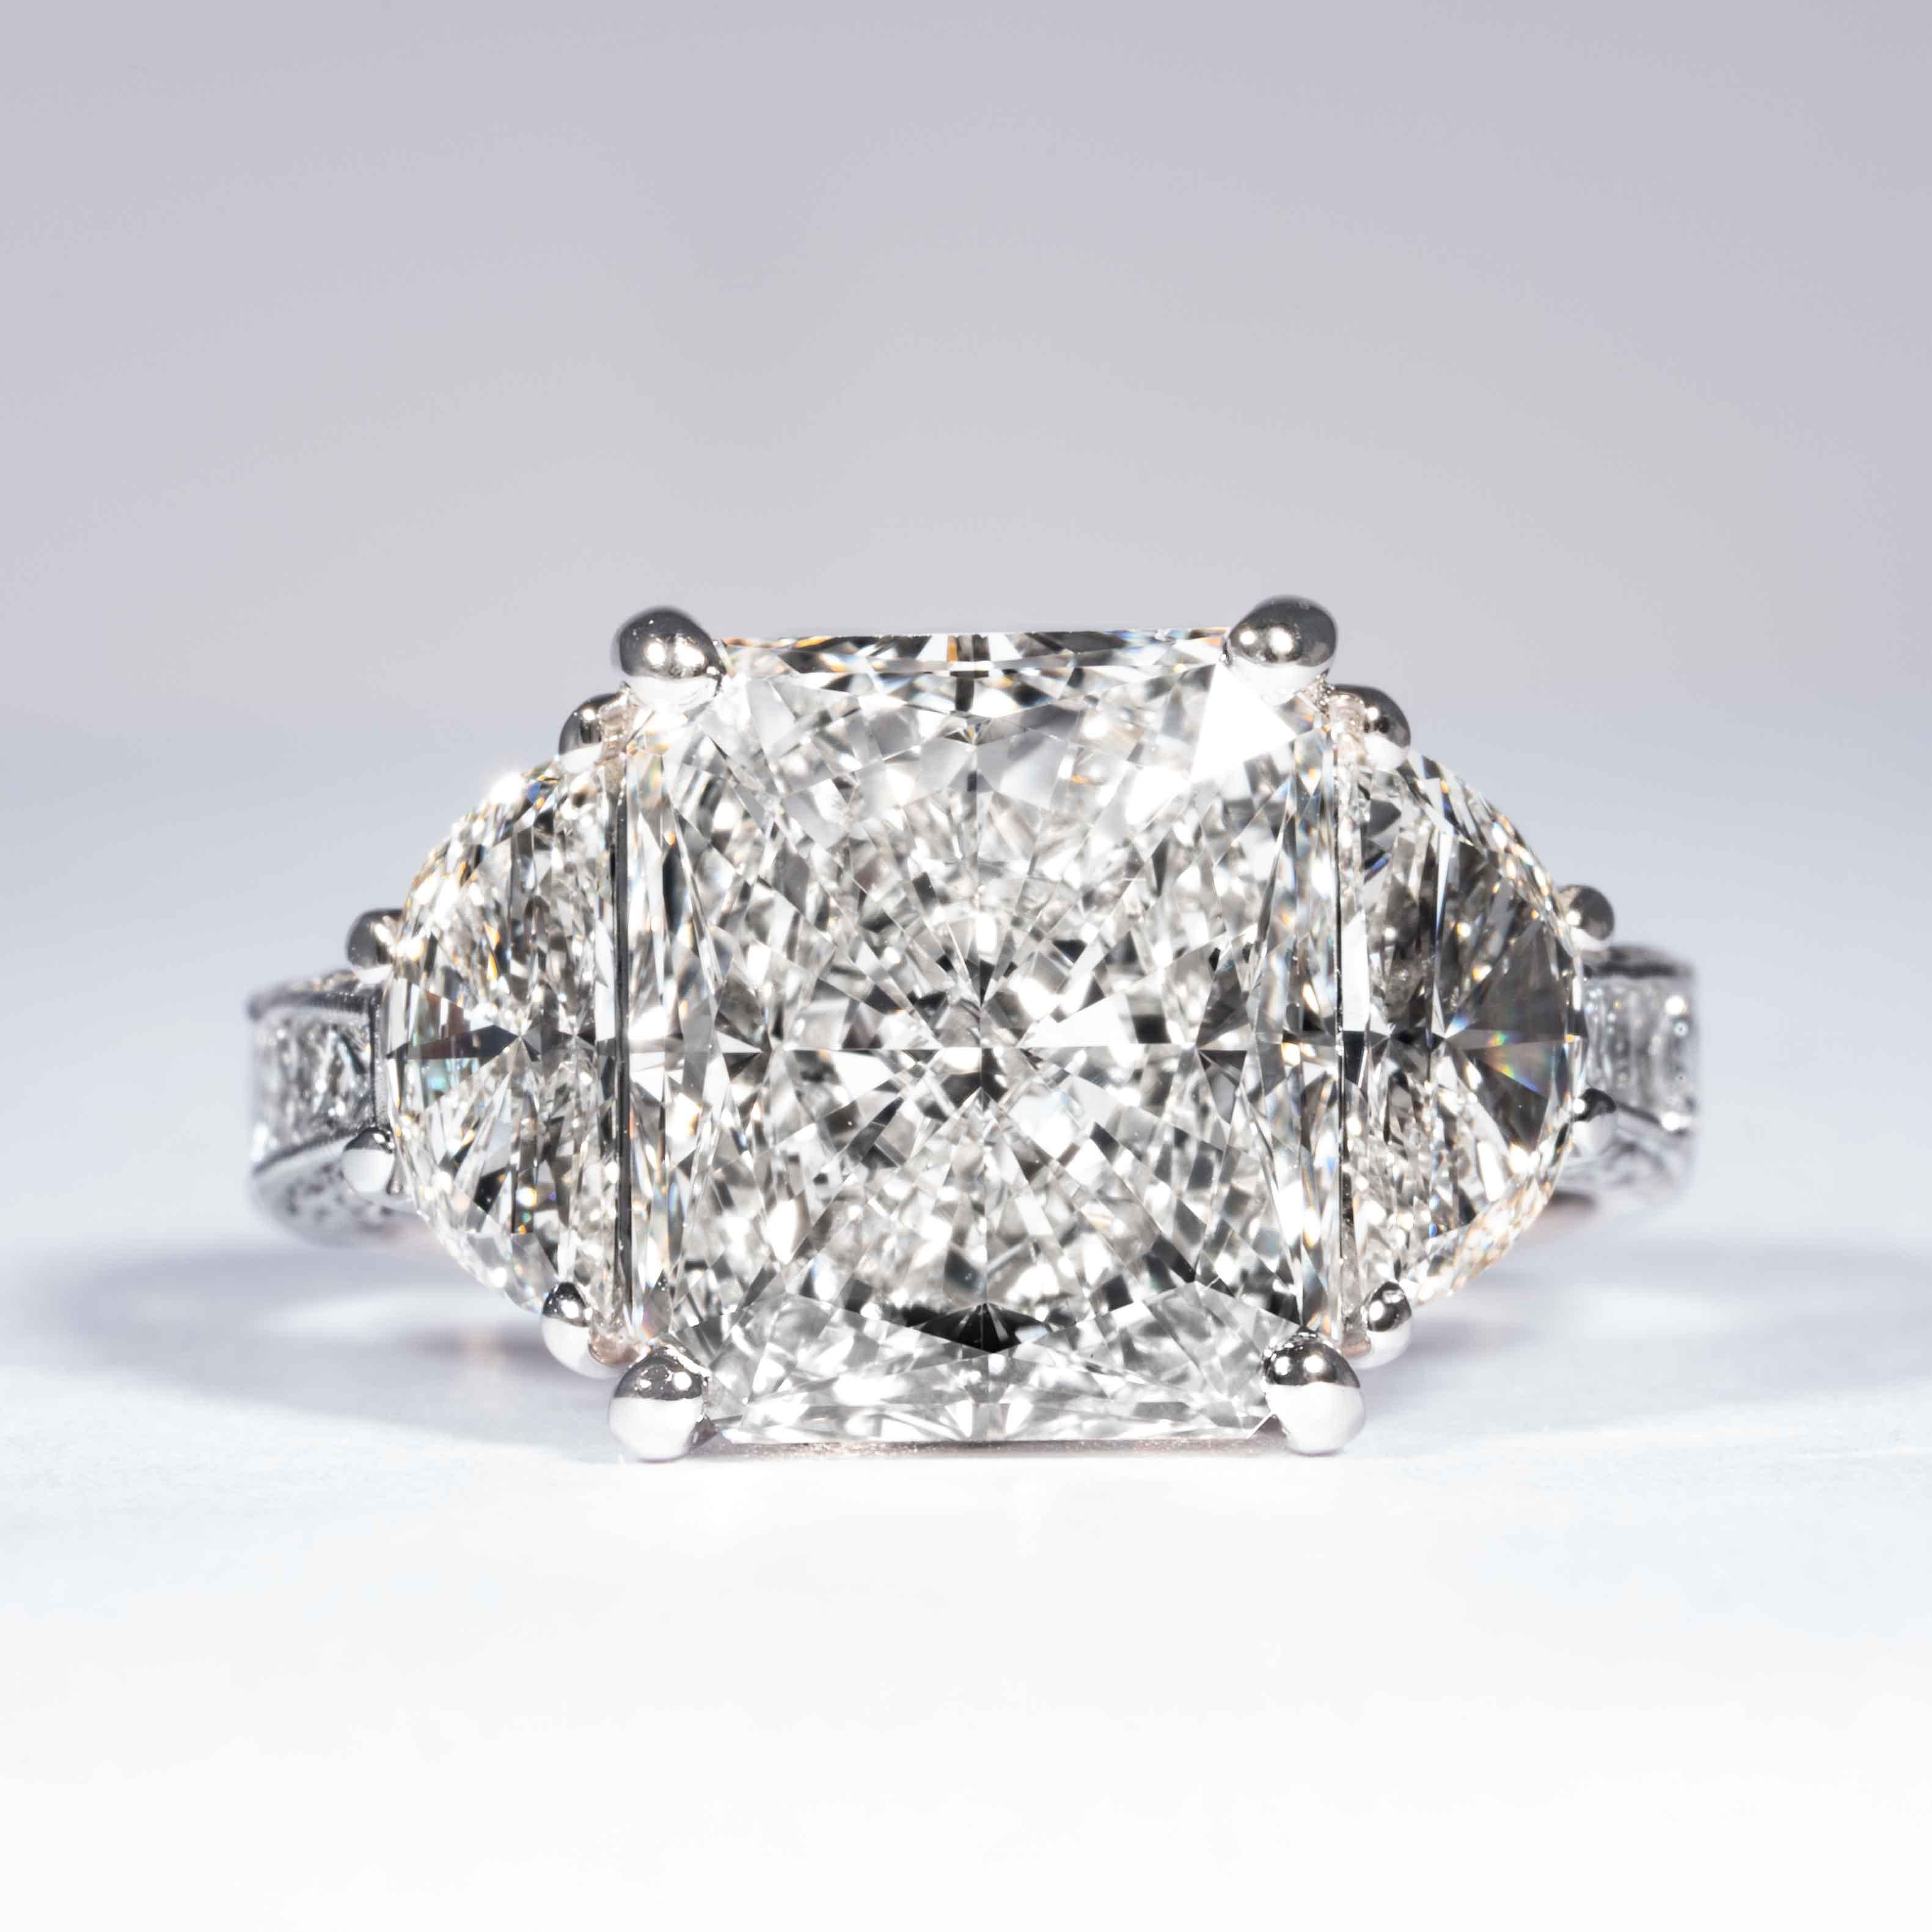 This radiant cut diamond ring is offered by Shreve, Crump & Low. This 5.07 carat GIA Certified I VS2 radiant cut diamond measuring 11.06 x 9.62 x 5.67 mm is custom set in a handcrafted Shreve, Crump & Low platinum 3-stone ring. The 5.07 carat